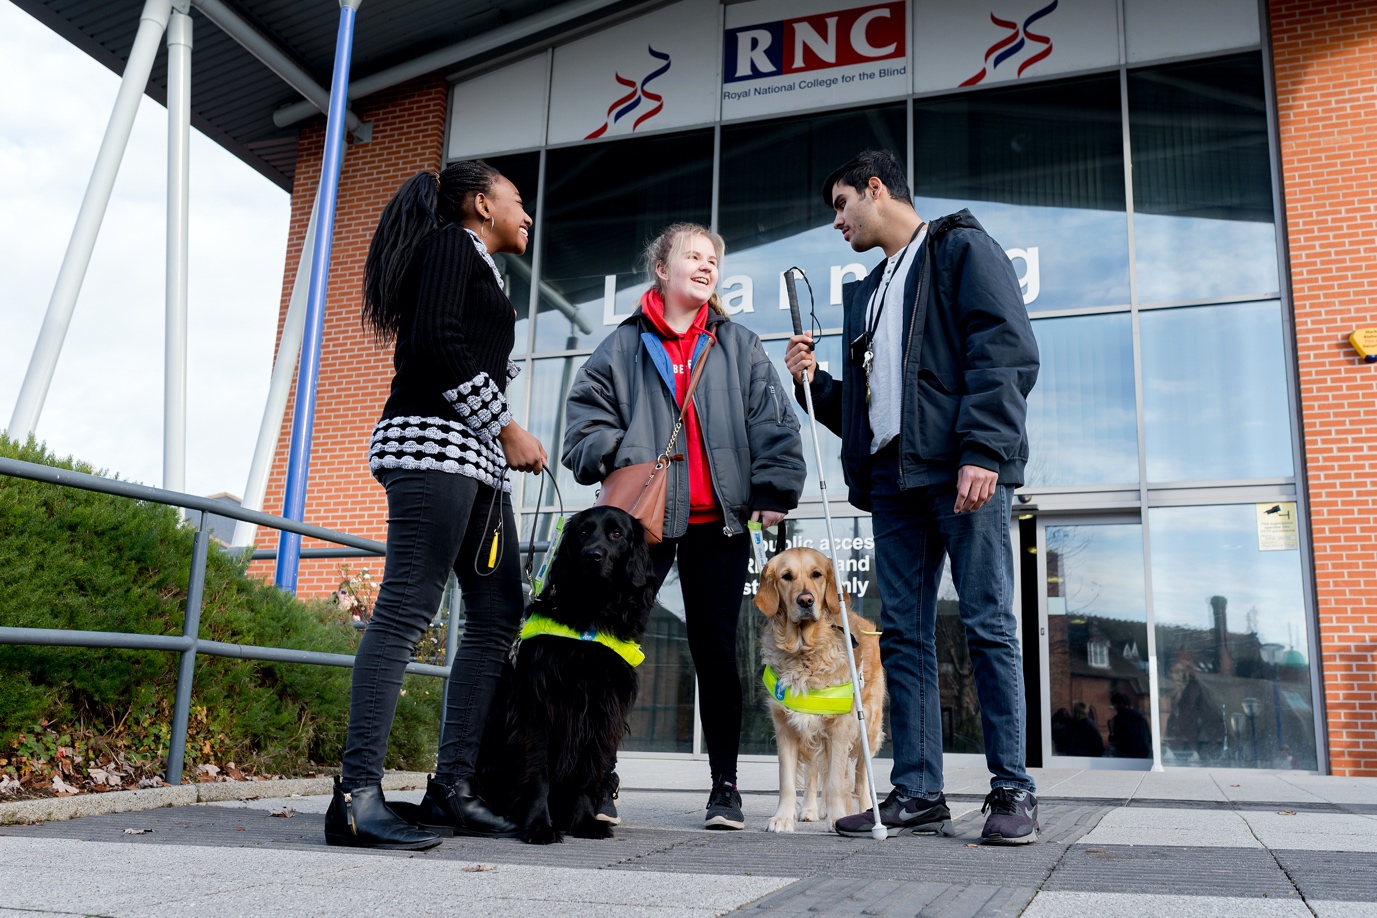 NEWS | The Royal National College for the Blind Secures Funding from the National Lottery Community Fund for Covid 19 Assistance